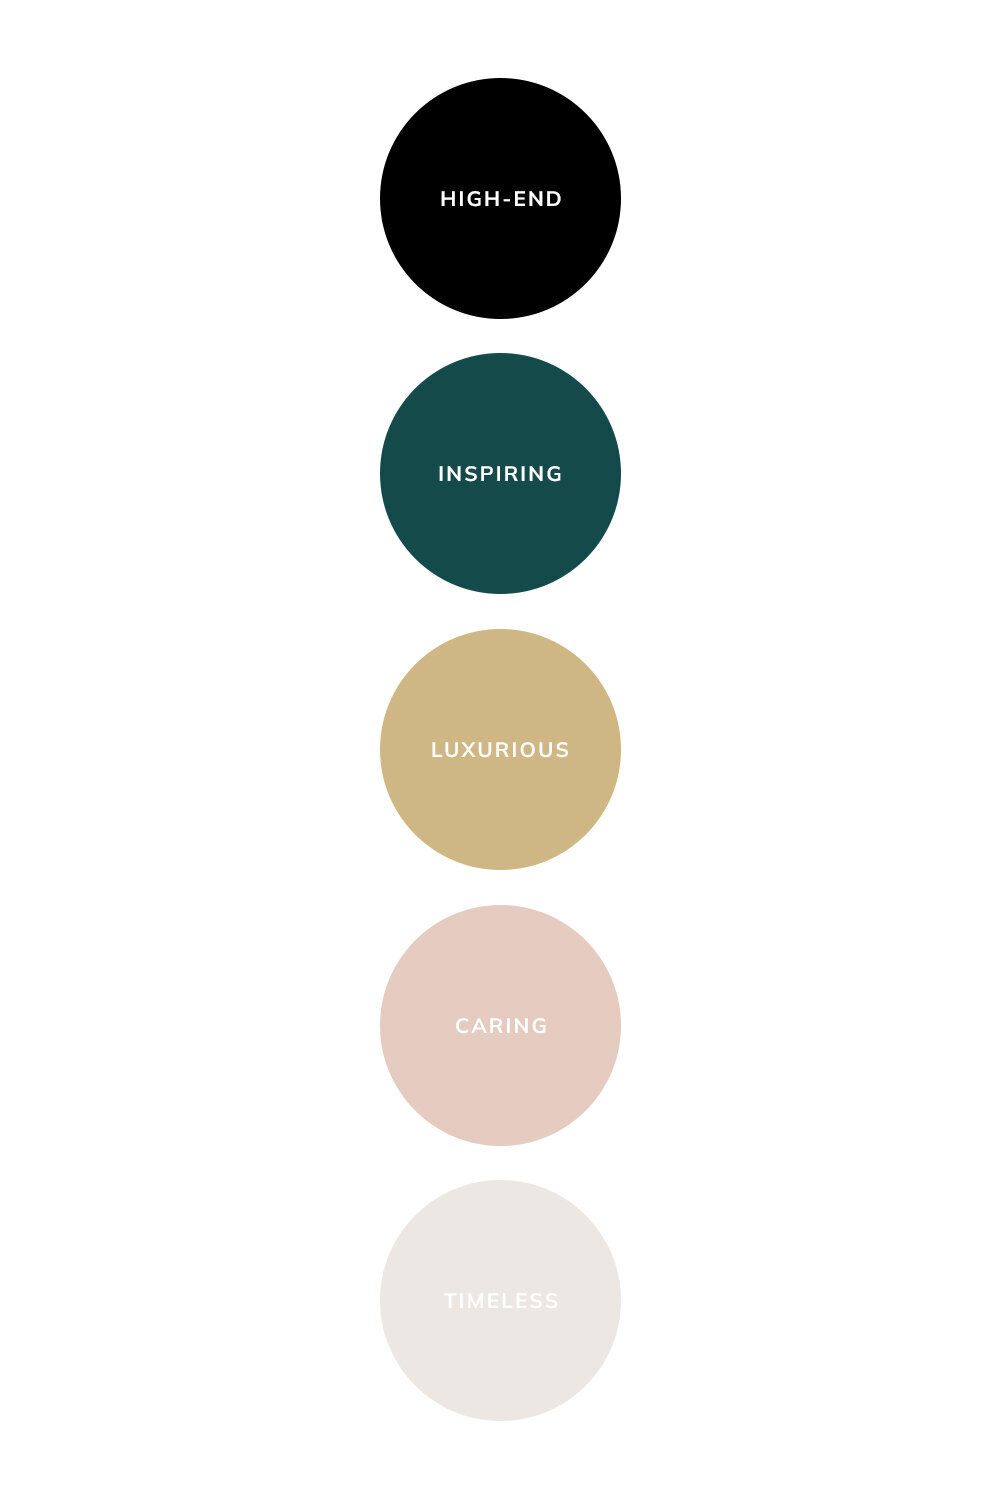 green and pink color palette for luxury brand